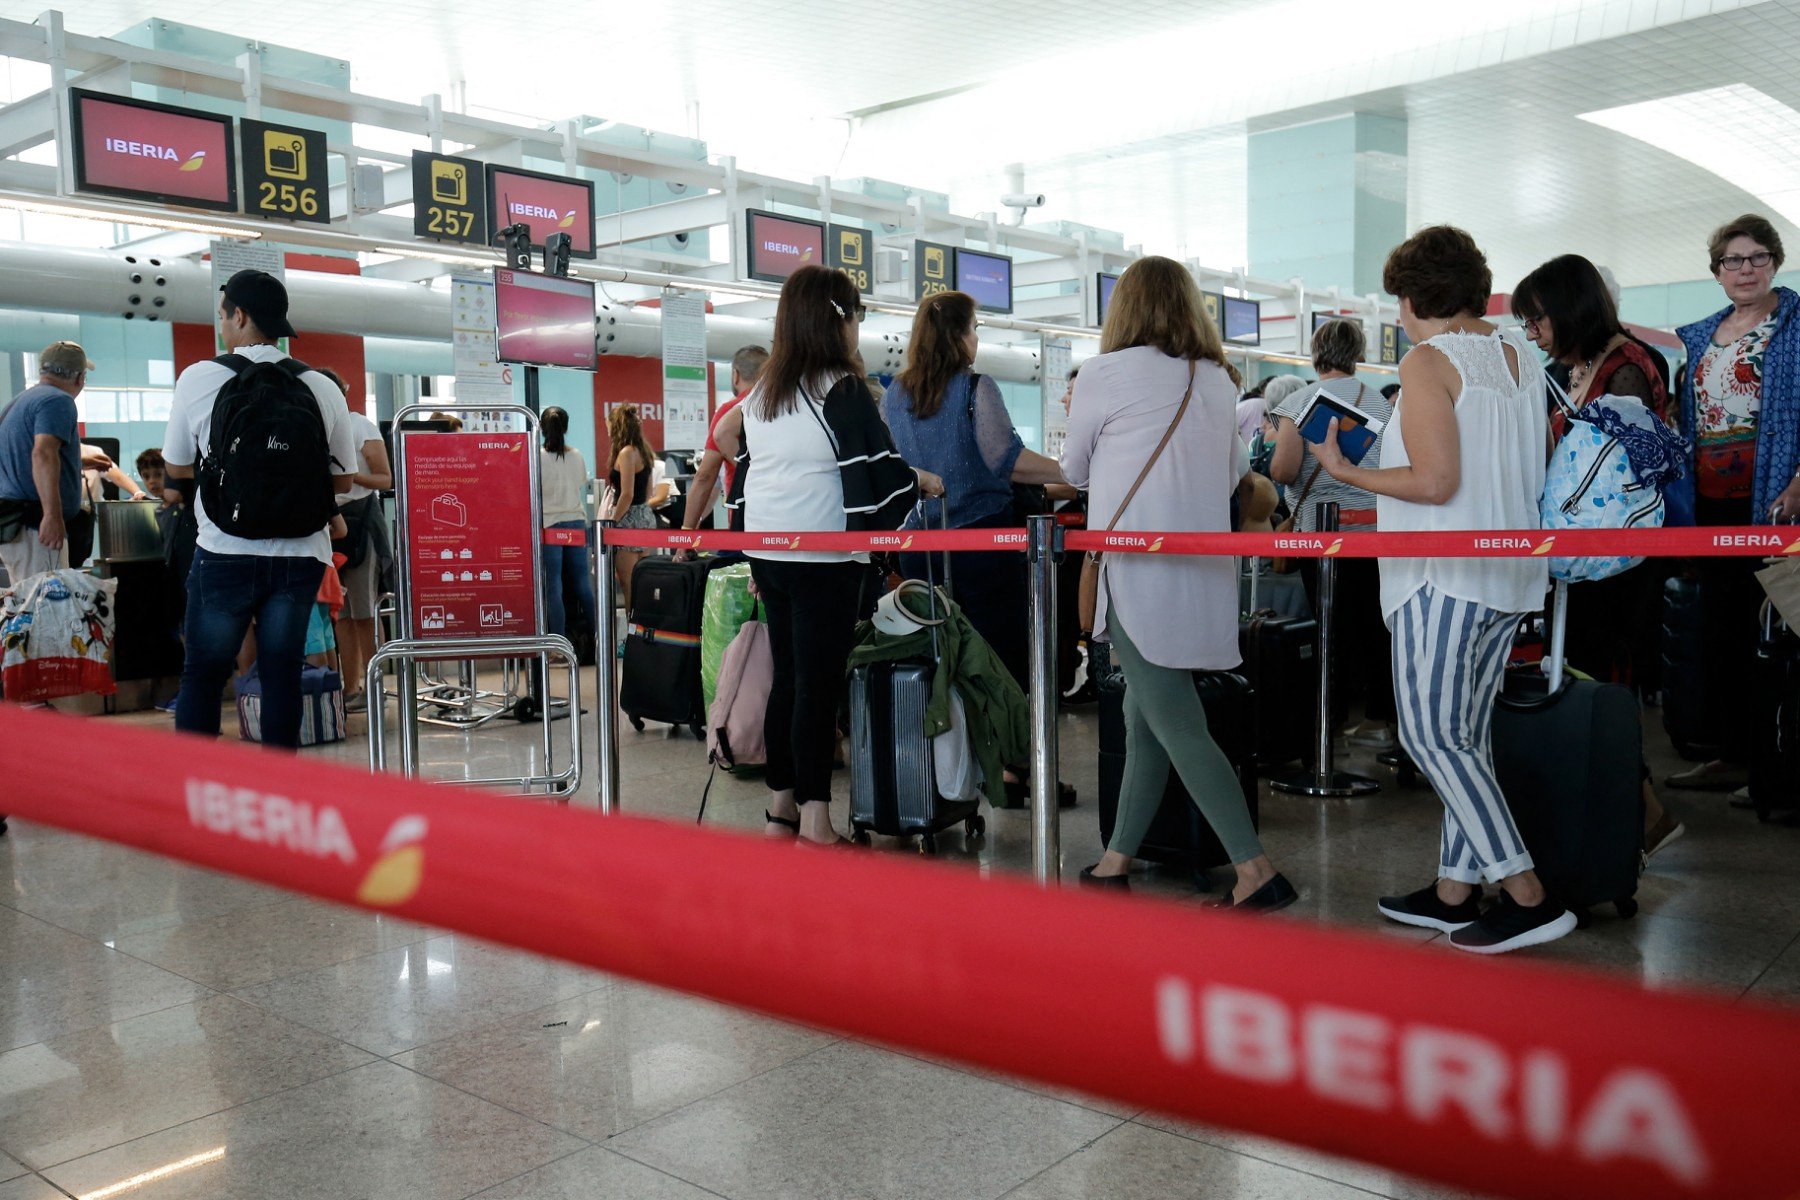 Spain's Christmas airport strike: Everything we know so far thumbnail